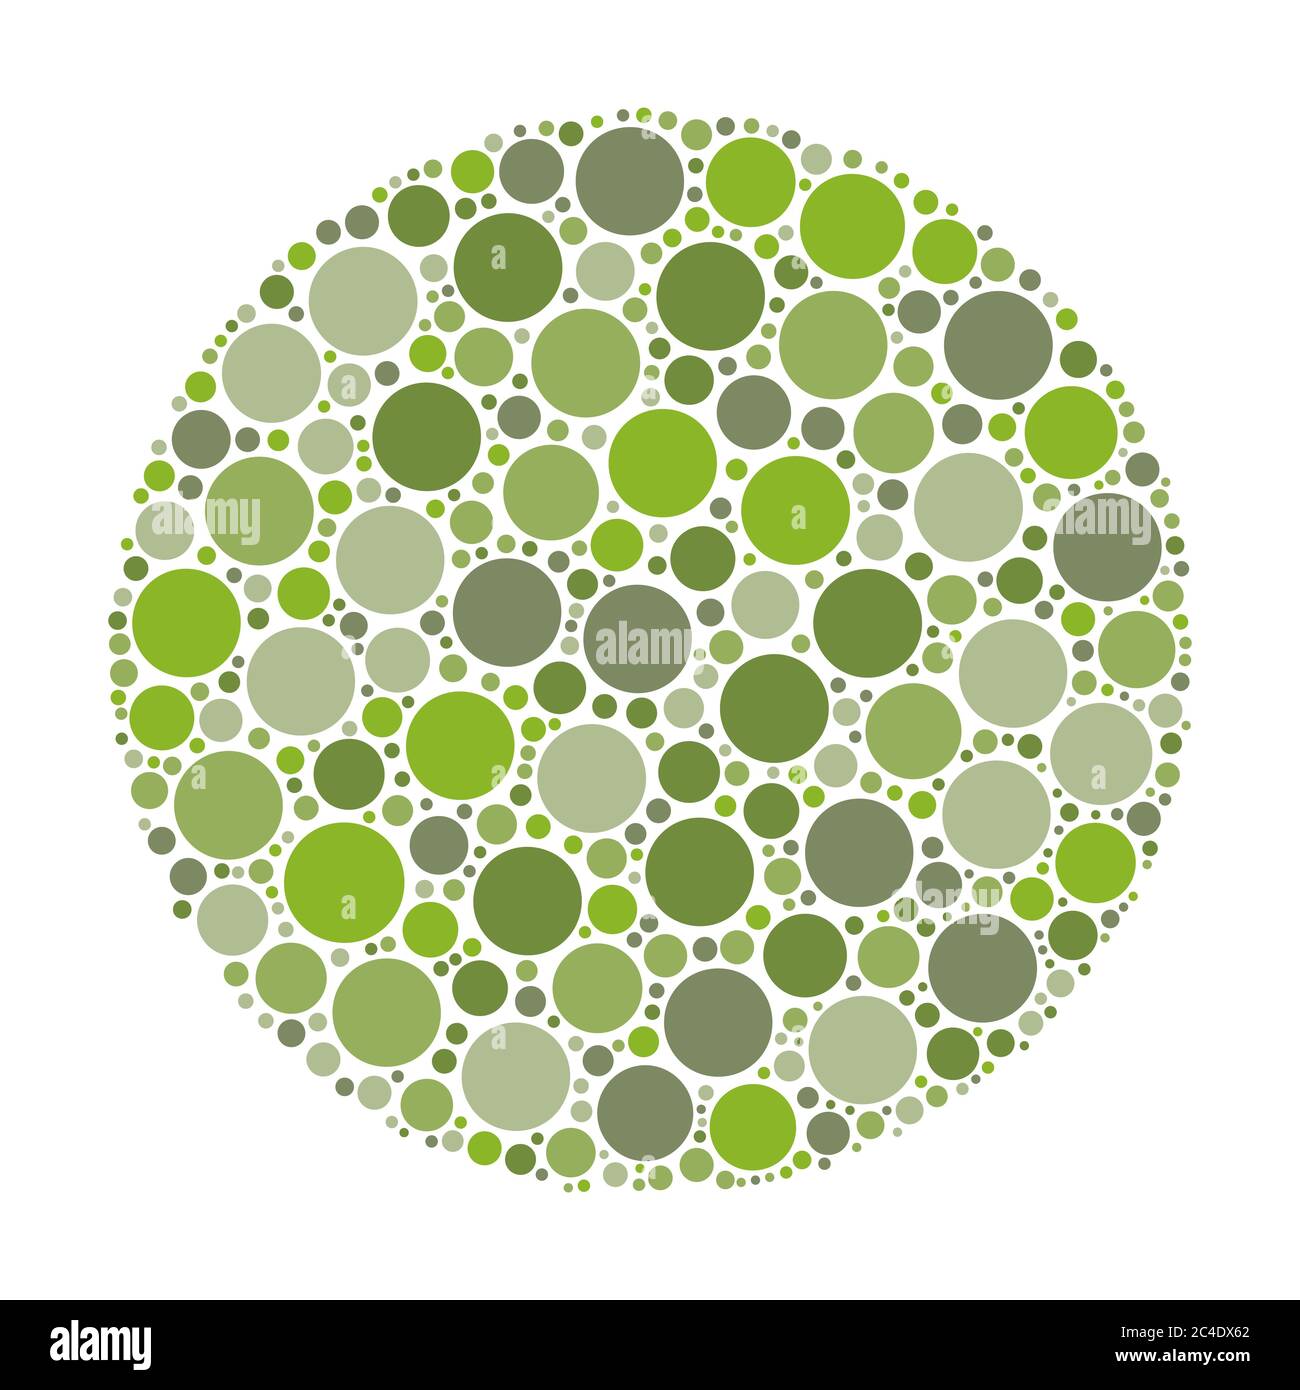 Circle made of dots in shades of green. Abstract vector illustration inspired by medical Ishirara test for color-blindness. Stock Vector